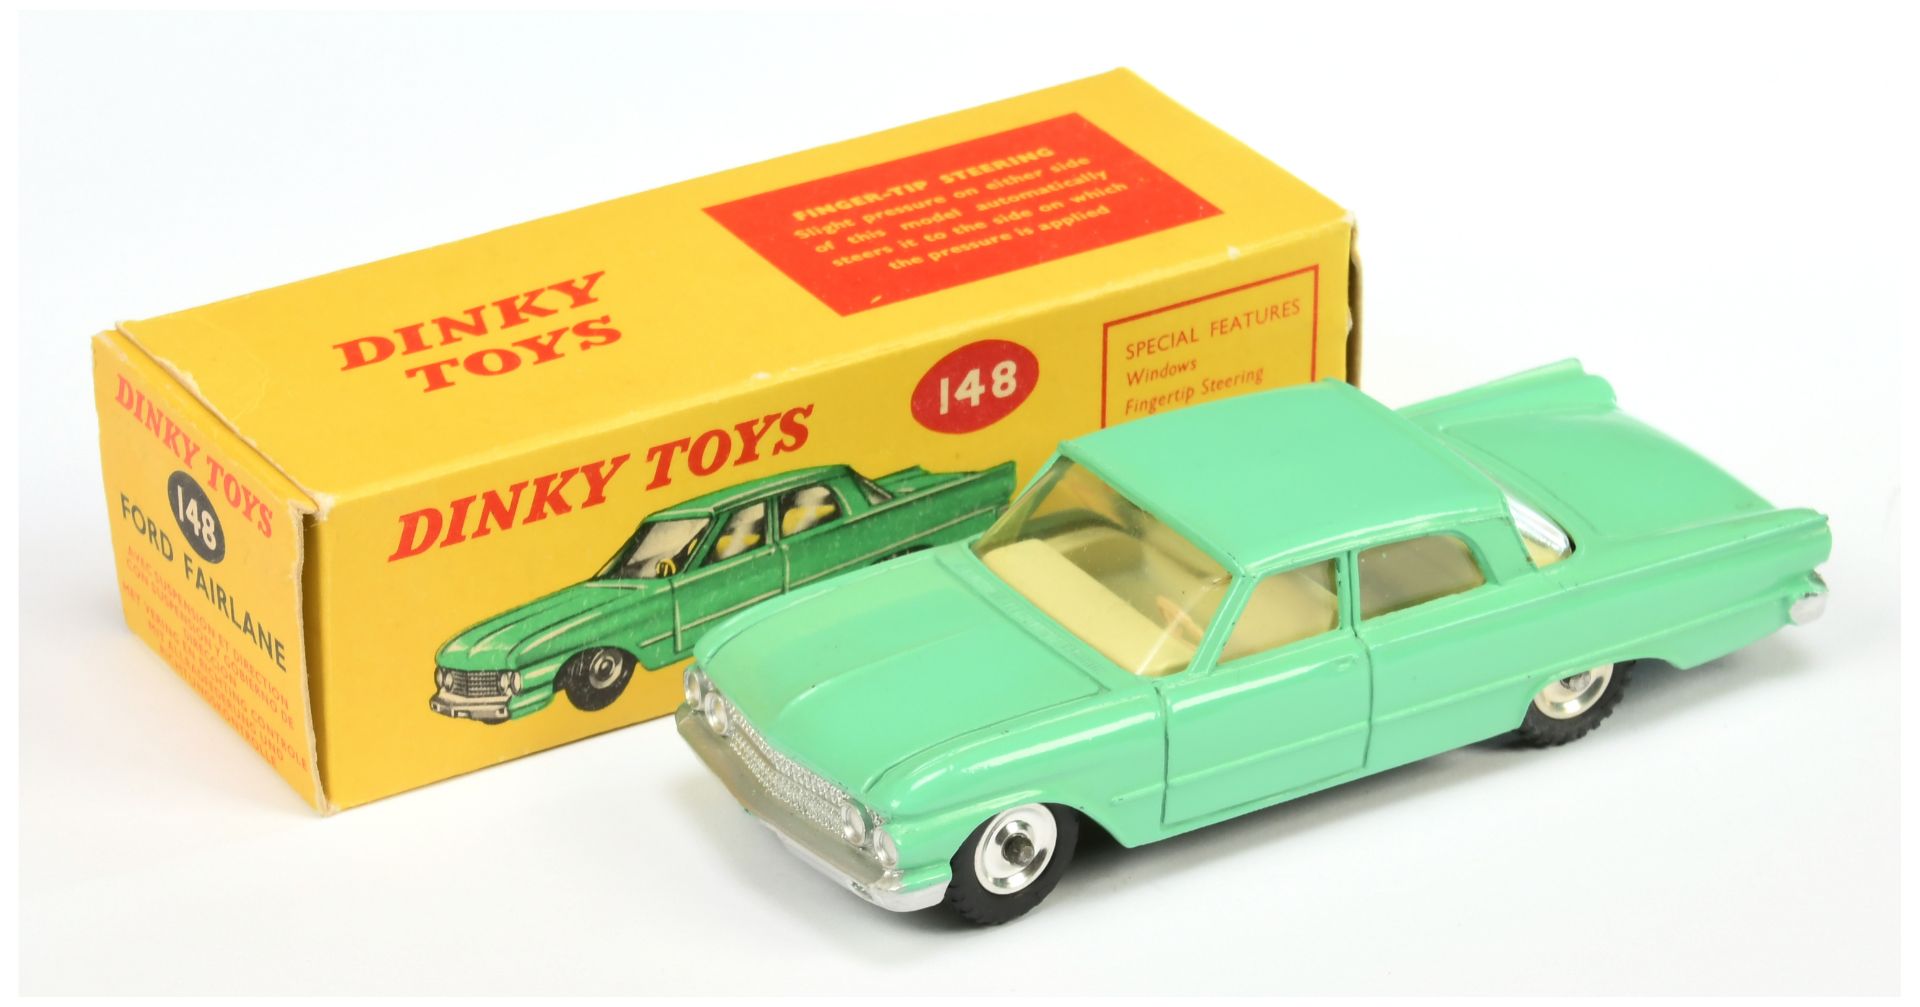 Dinky Toys 148 Ford Fairlane - Pale green, pale cream interior, silver trim and spun hubs 